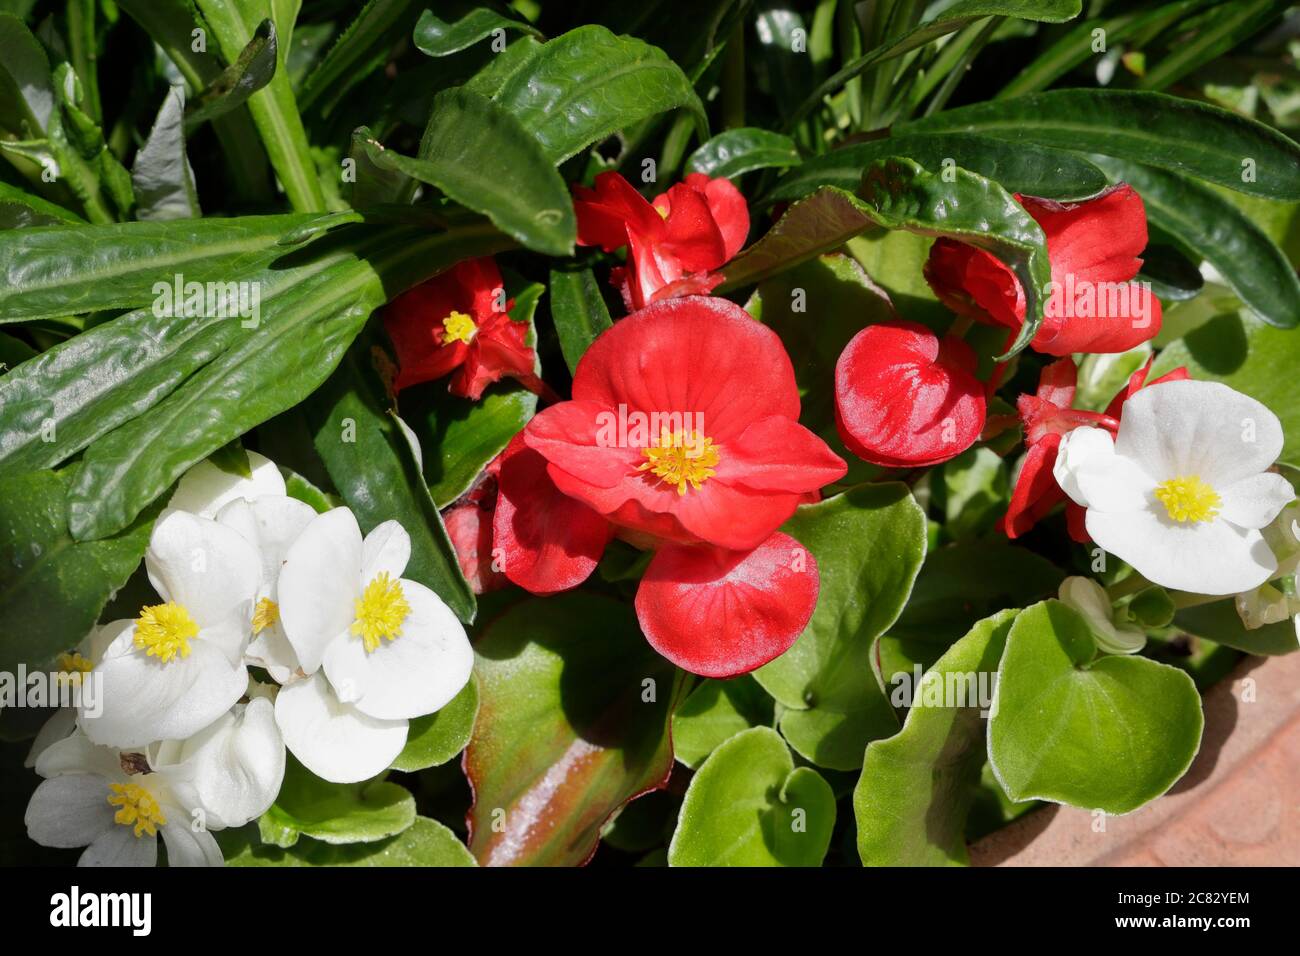 Begonia flowers, red and white Stock Photo